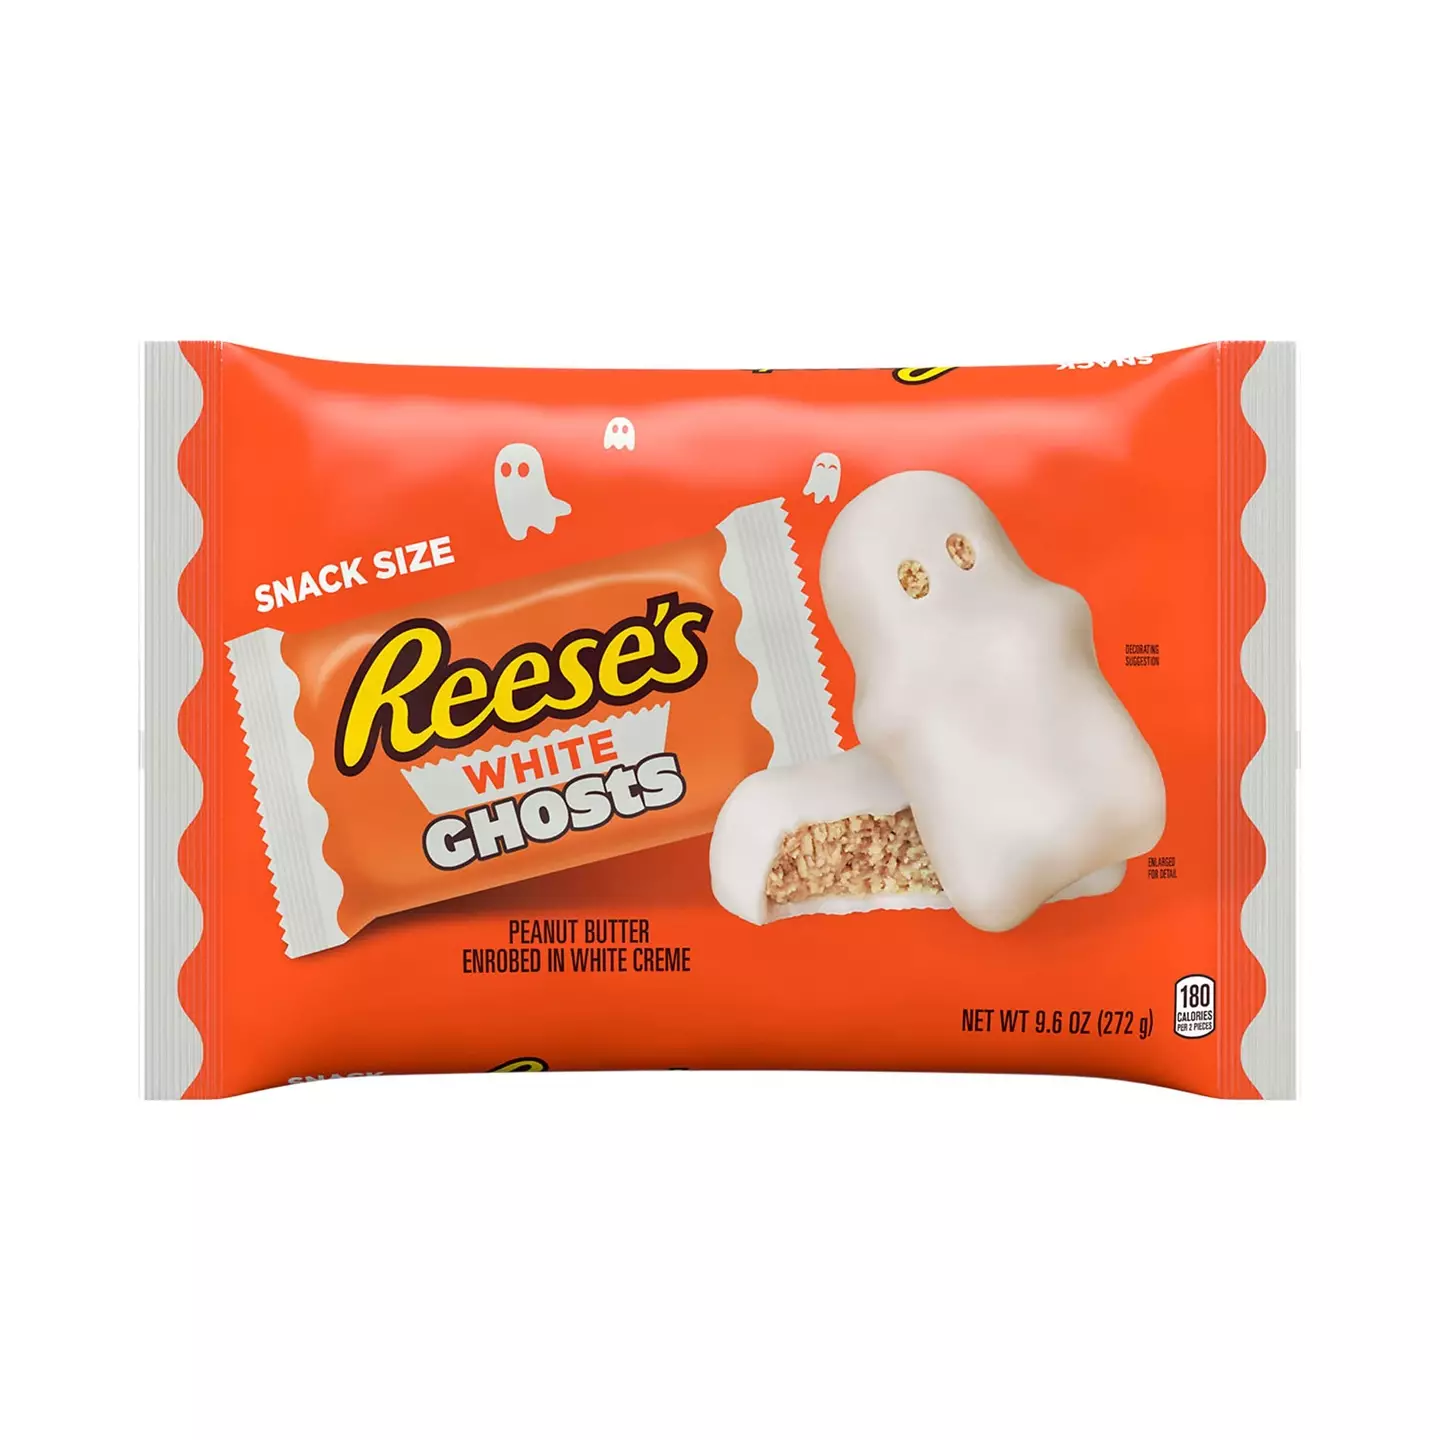 Hershey's Halloween ghosts have also been condemned by Kelly.